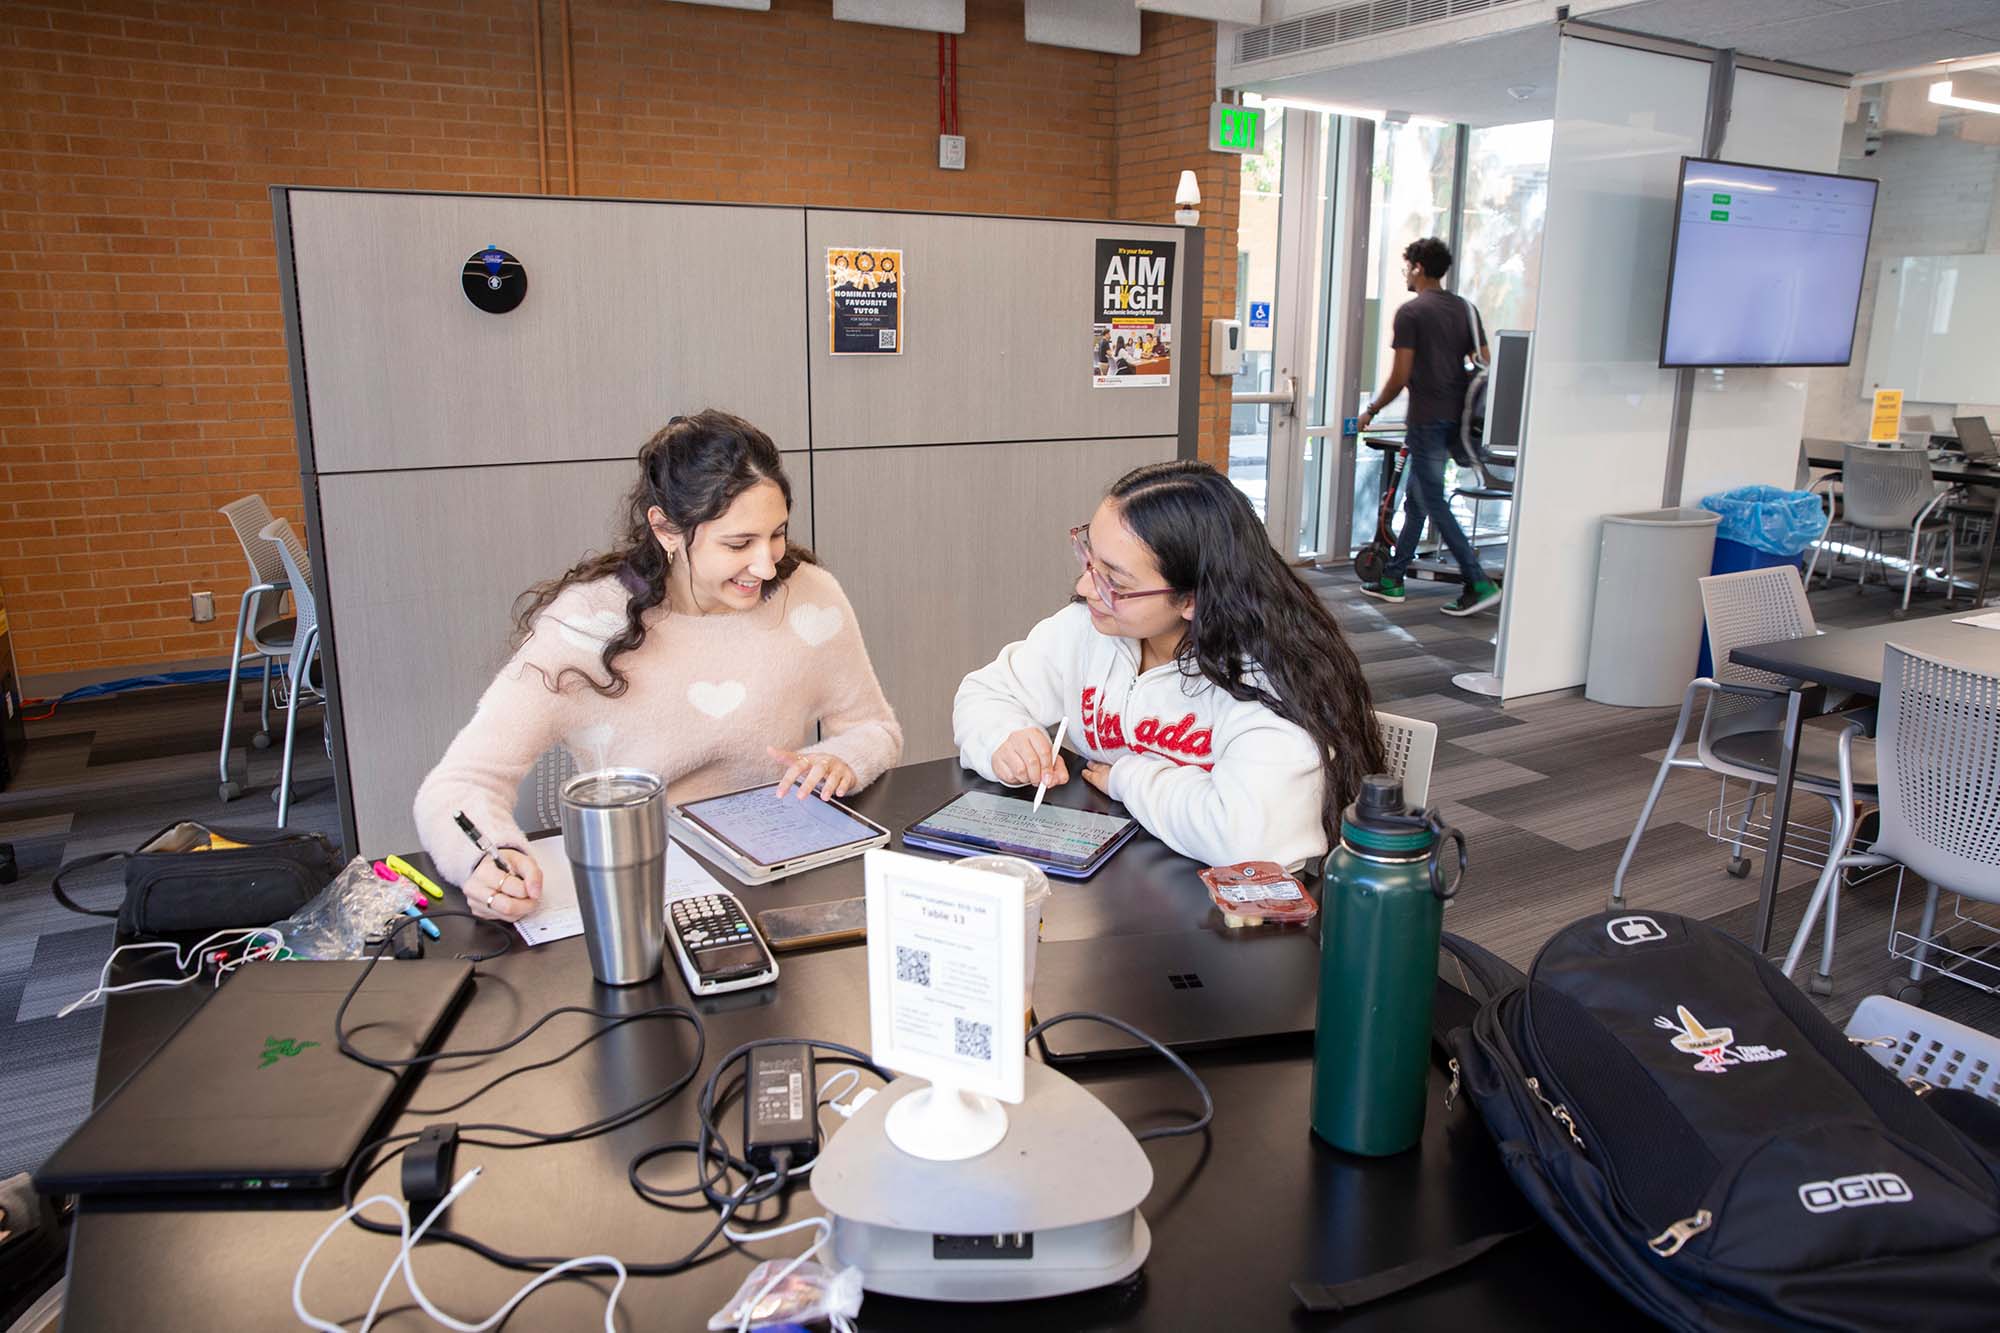 Two students engaged in a study session at a table in a campus study area with various electronic devices connected with cables.